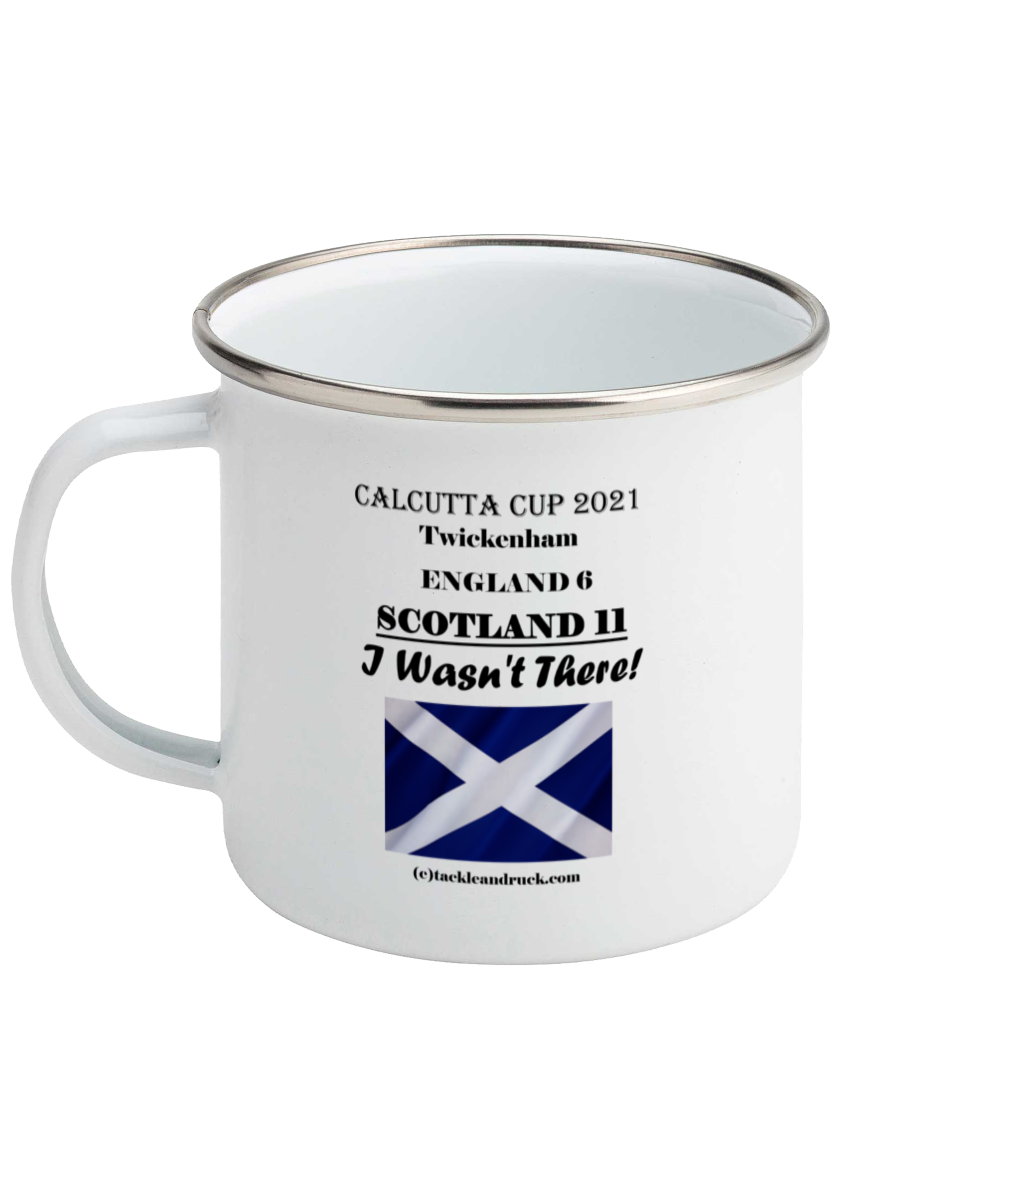 Tackle & Ruck - Calcutta Cup Win 2021 souvenir Enamel Mugs - I Wasnt There